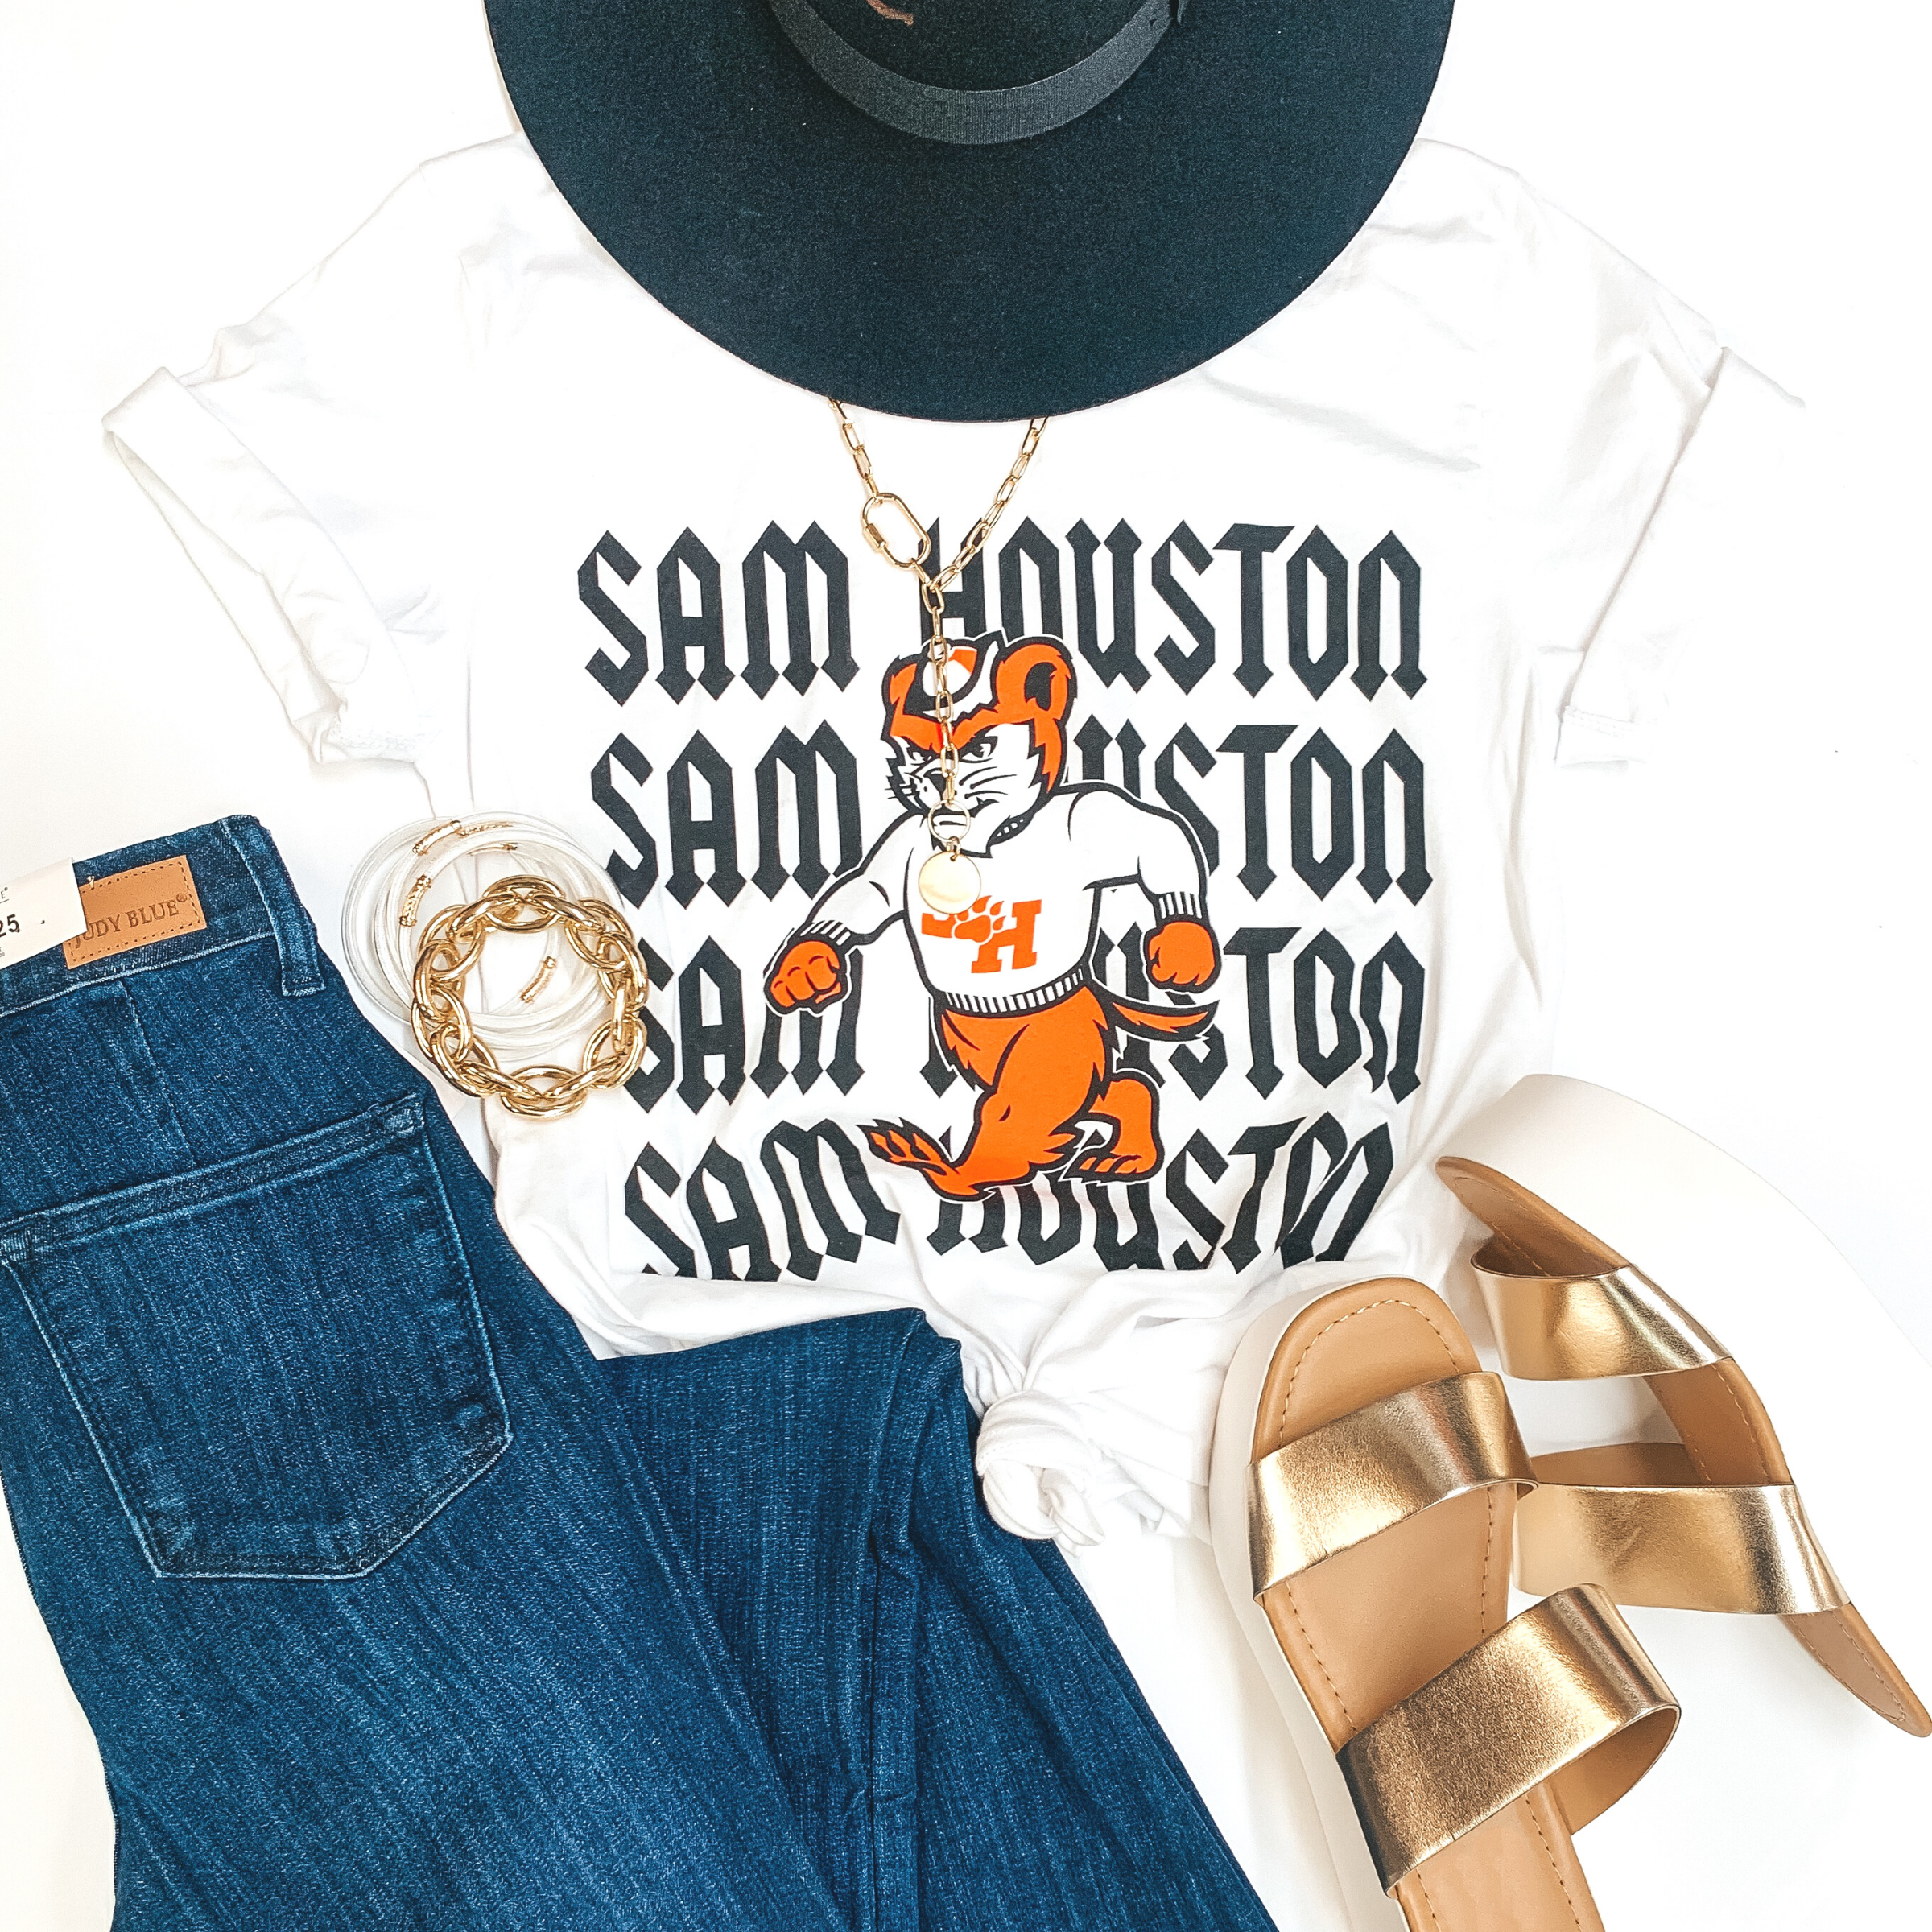 A white graphic tee with a bearkat that says "Sam Houston" in the background. Pictured on a white background with jeans, gold wedges, gold jewelry, and a black hat.